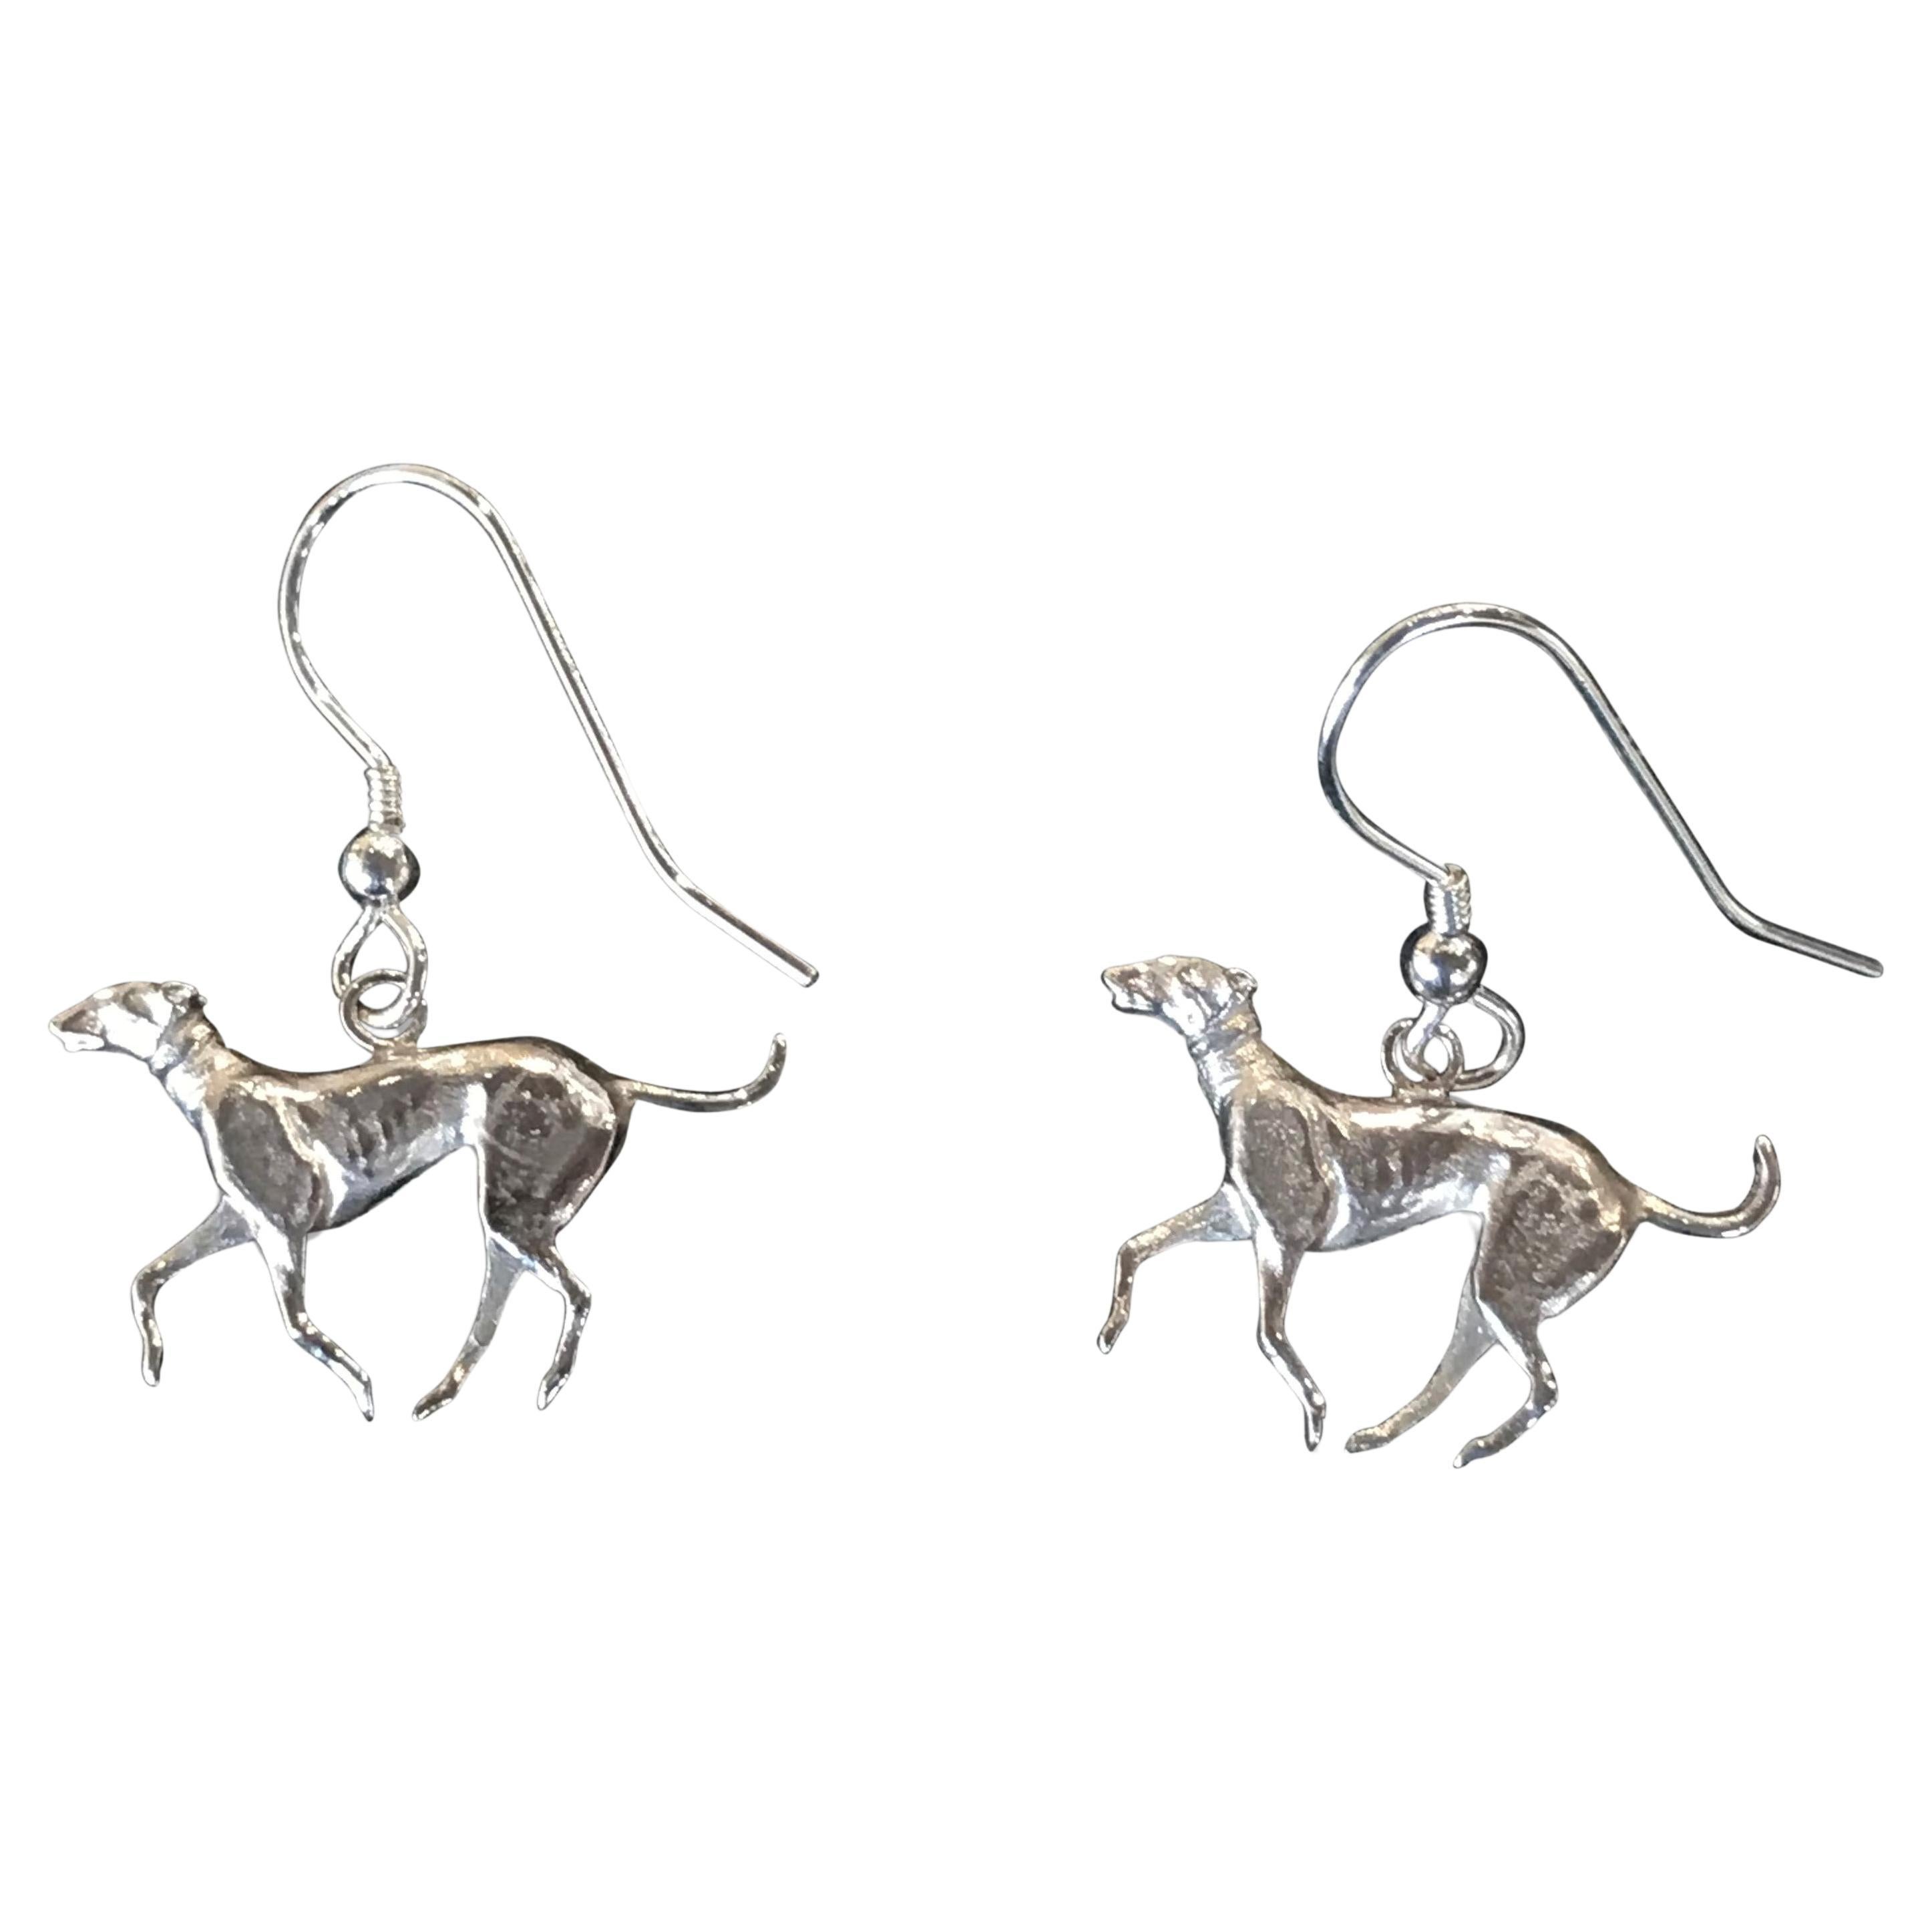 Paul Eaton Sculpted Flat Sterling Silver Greyhound Earrings